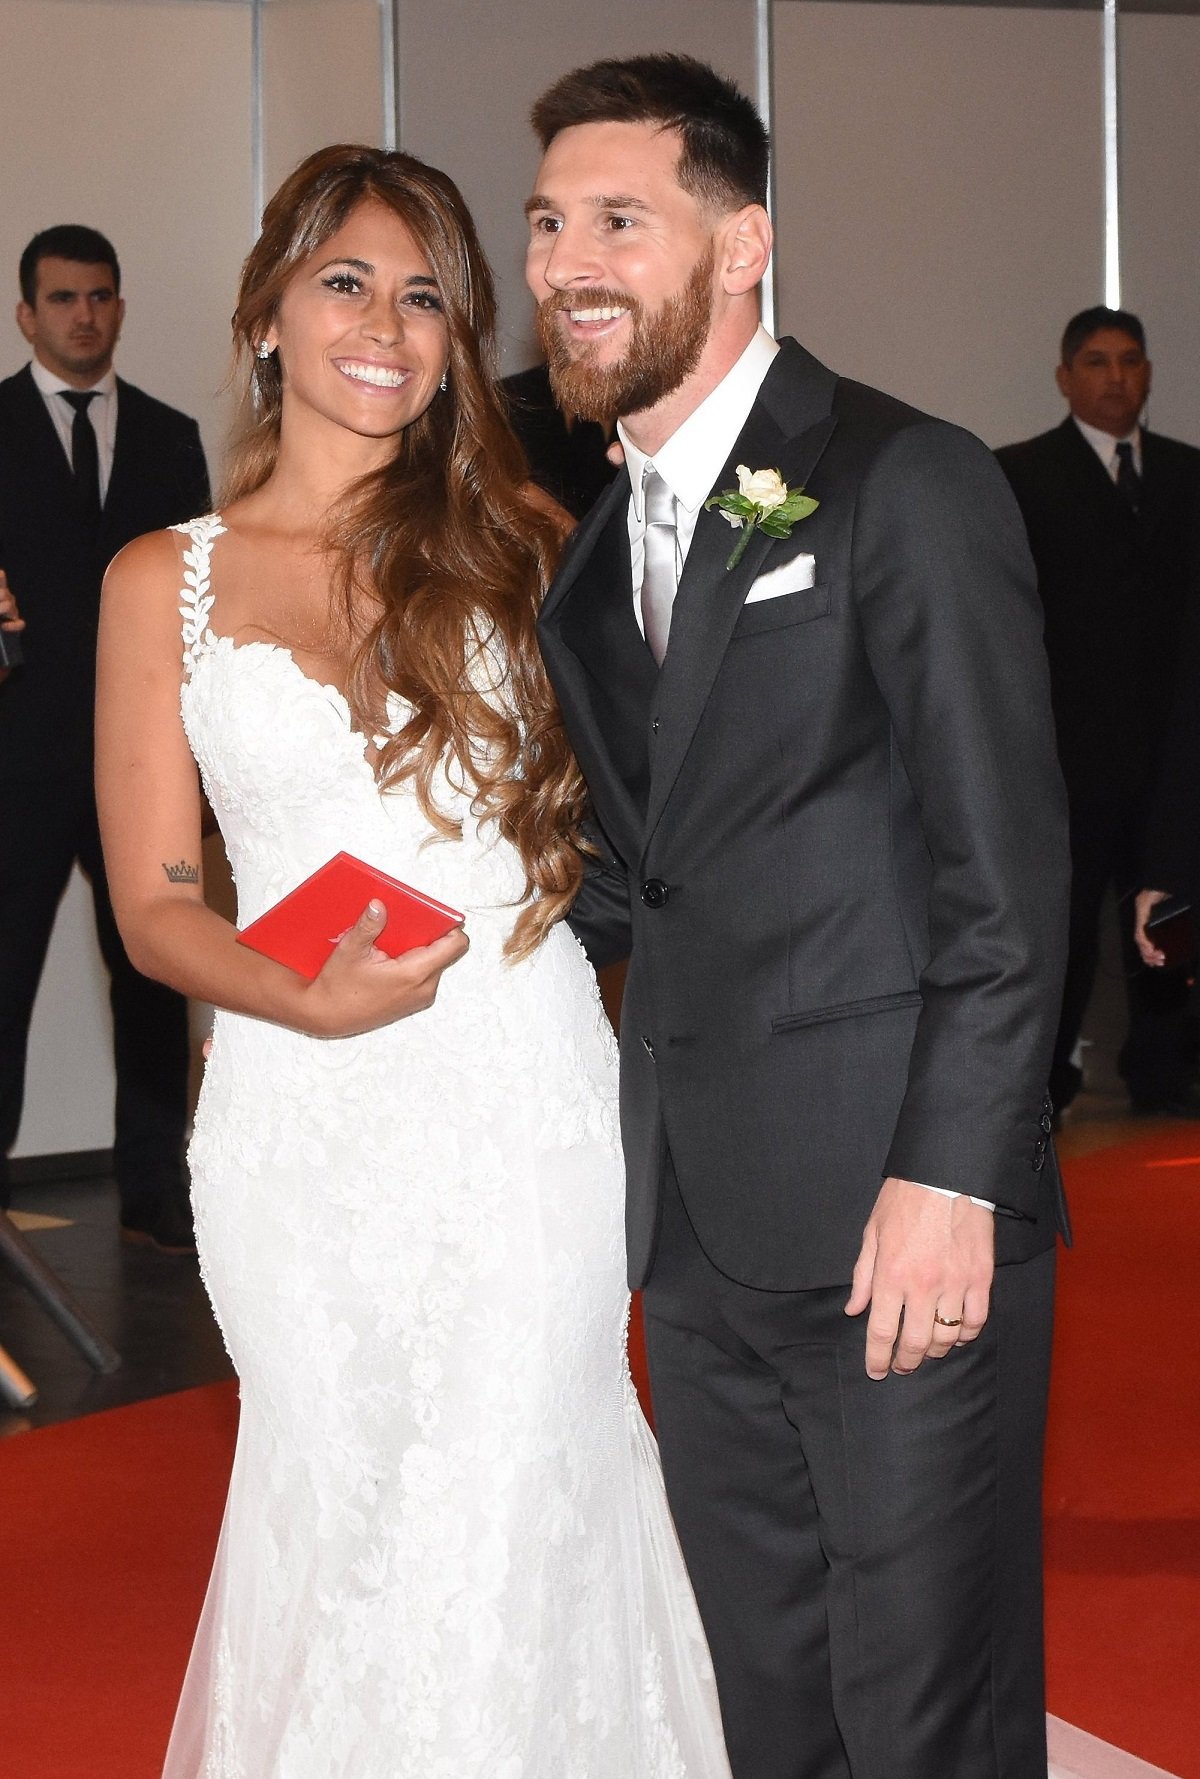 Lionel Messi and Antonela Roccuzzo smiling shortly after the couple were married in 2017